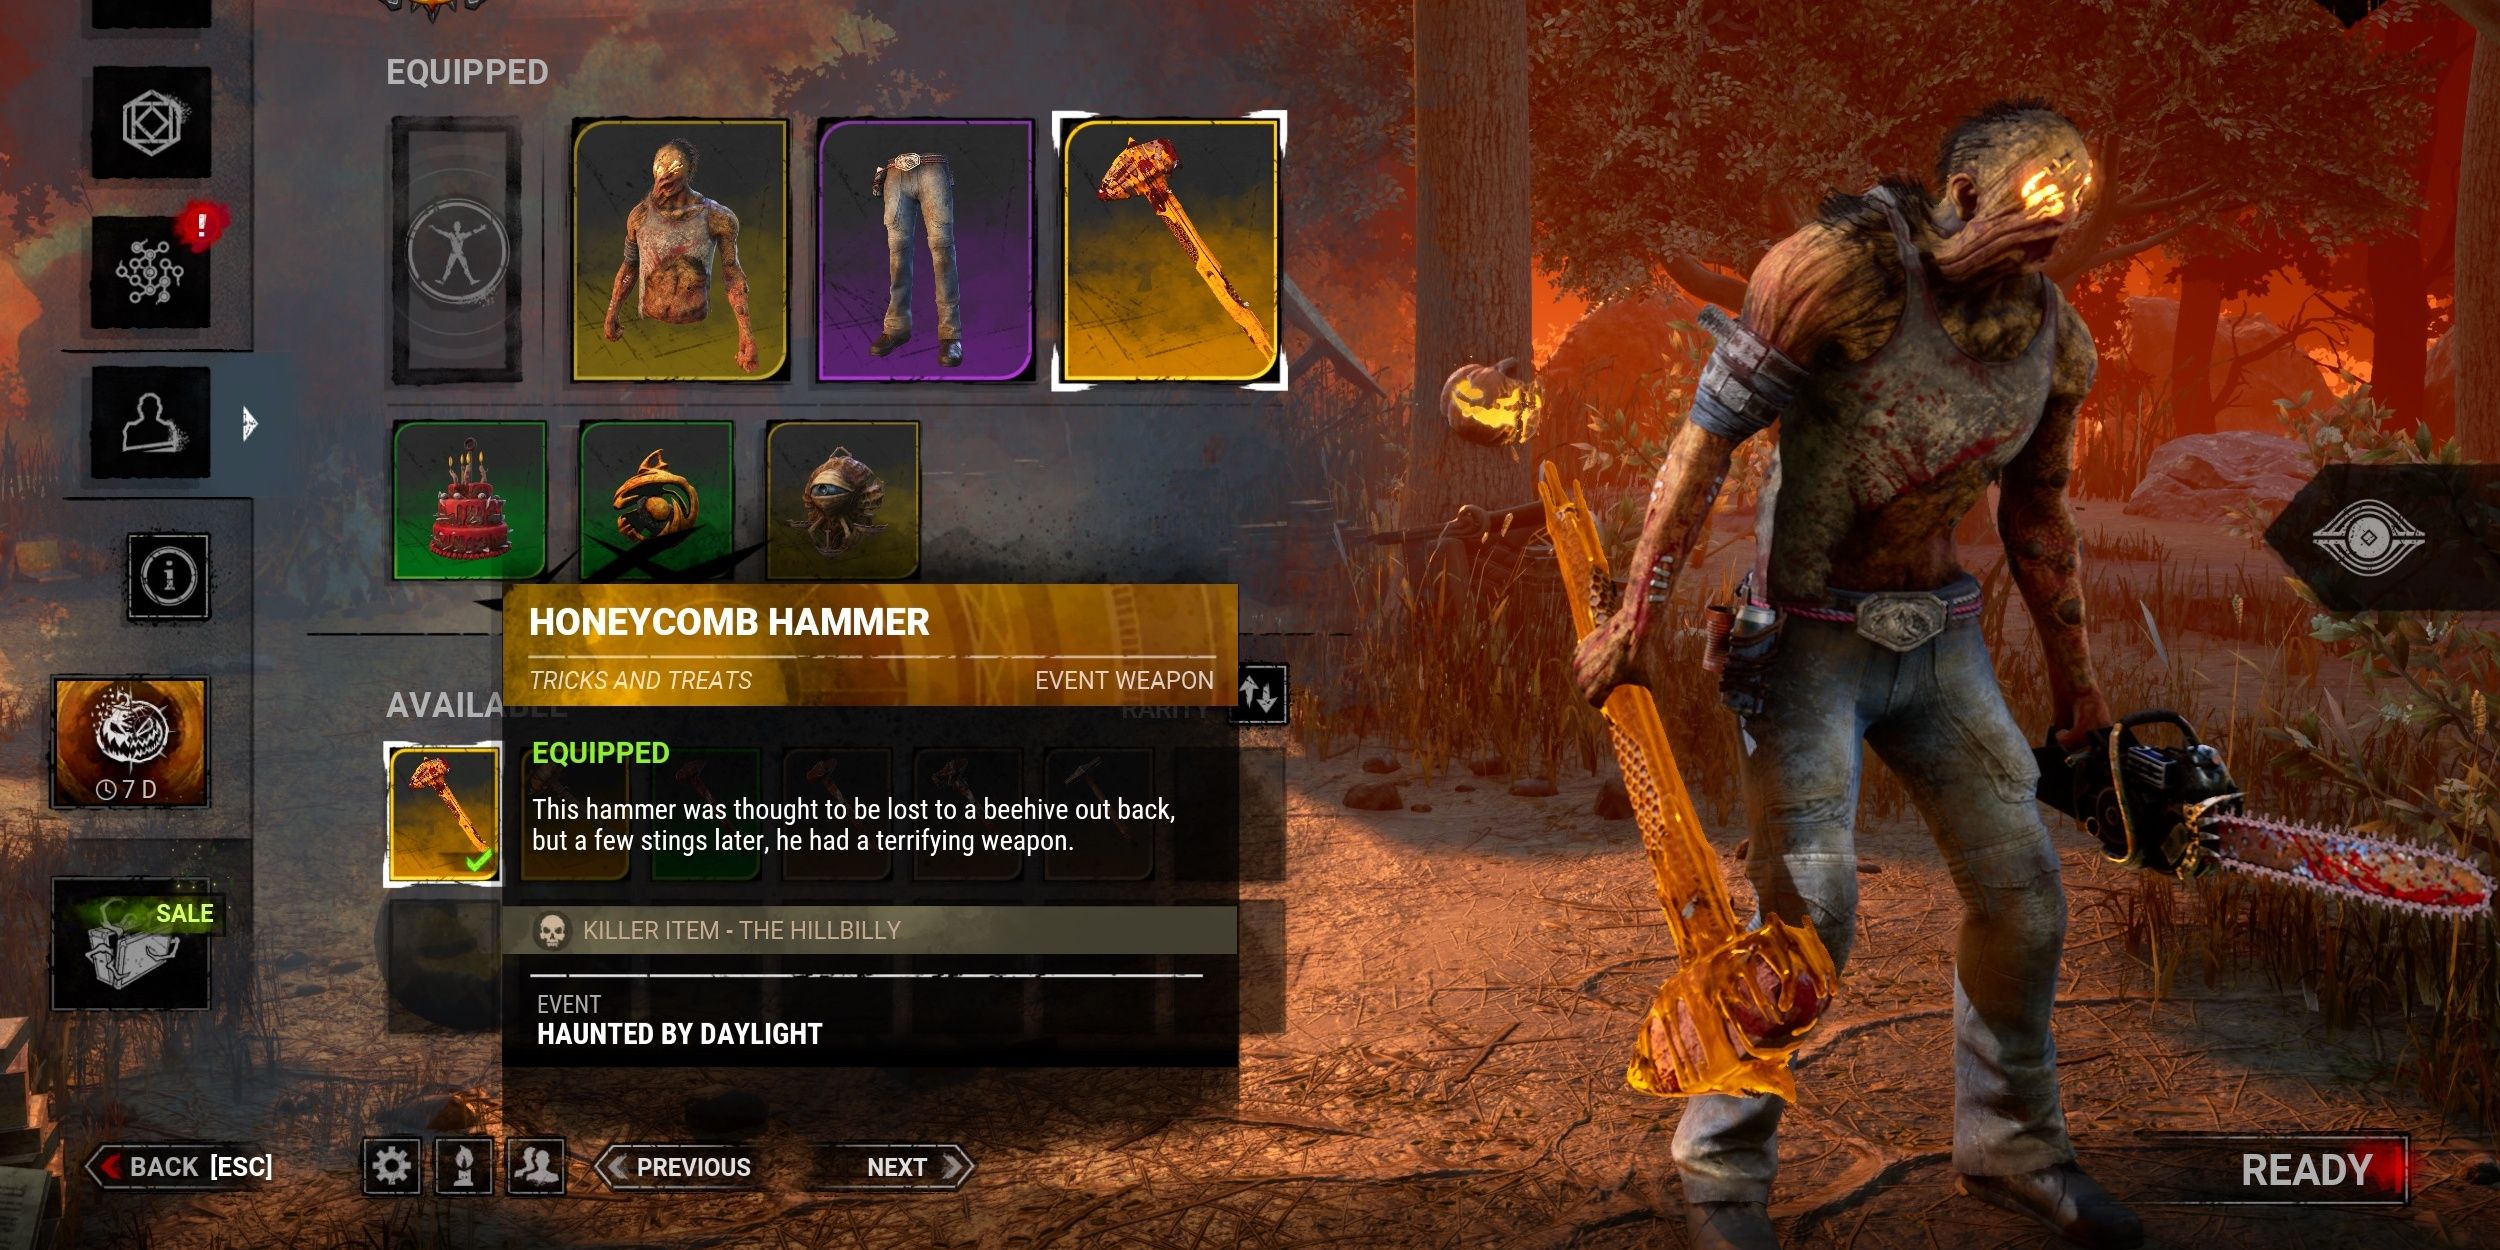 The Hillbilly equipped with the Honeycomb Hammer weapon cosmetic